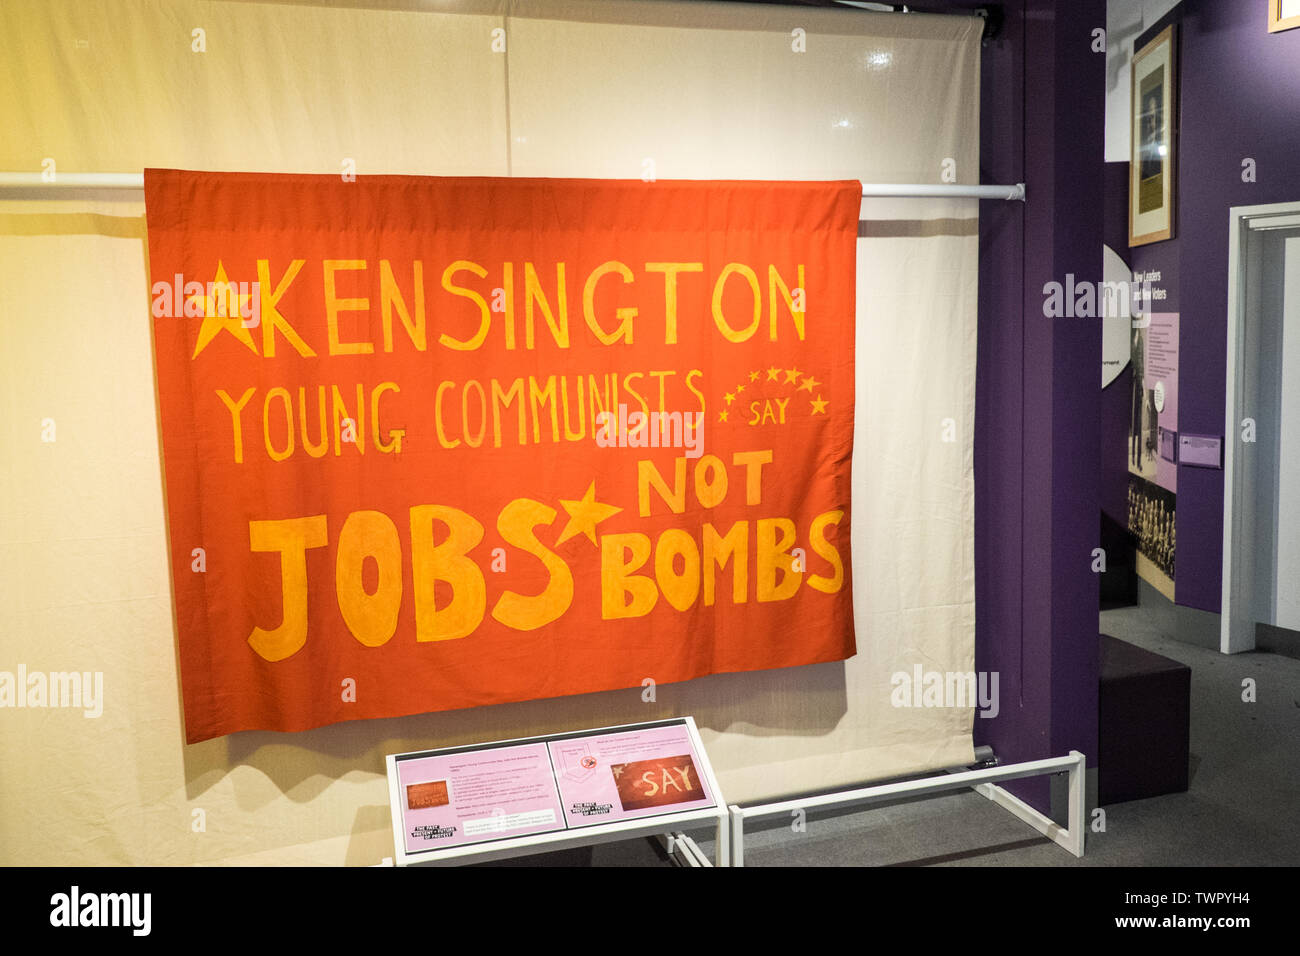 People's History Museum,Left Bank,devoted,to,equality,justice,Manchester, north,northern,north west,city,England,English,GB,UK,Britain,British,Europe  Stock Photo - Alamy